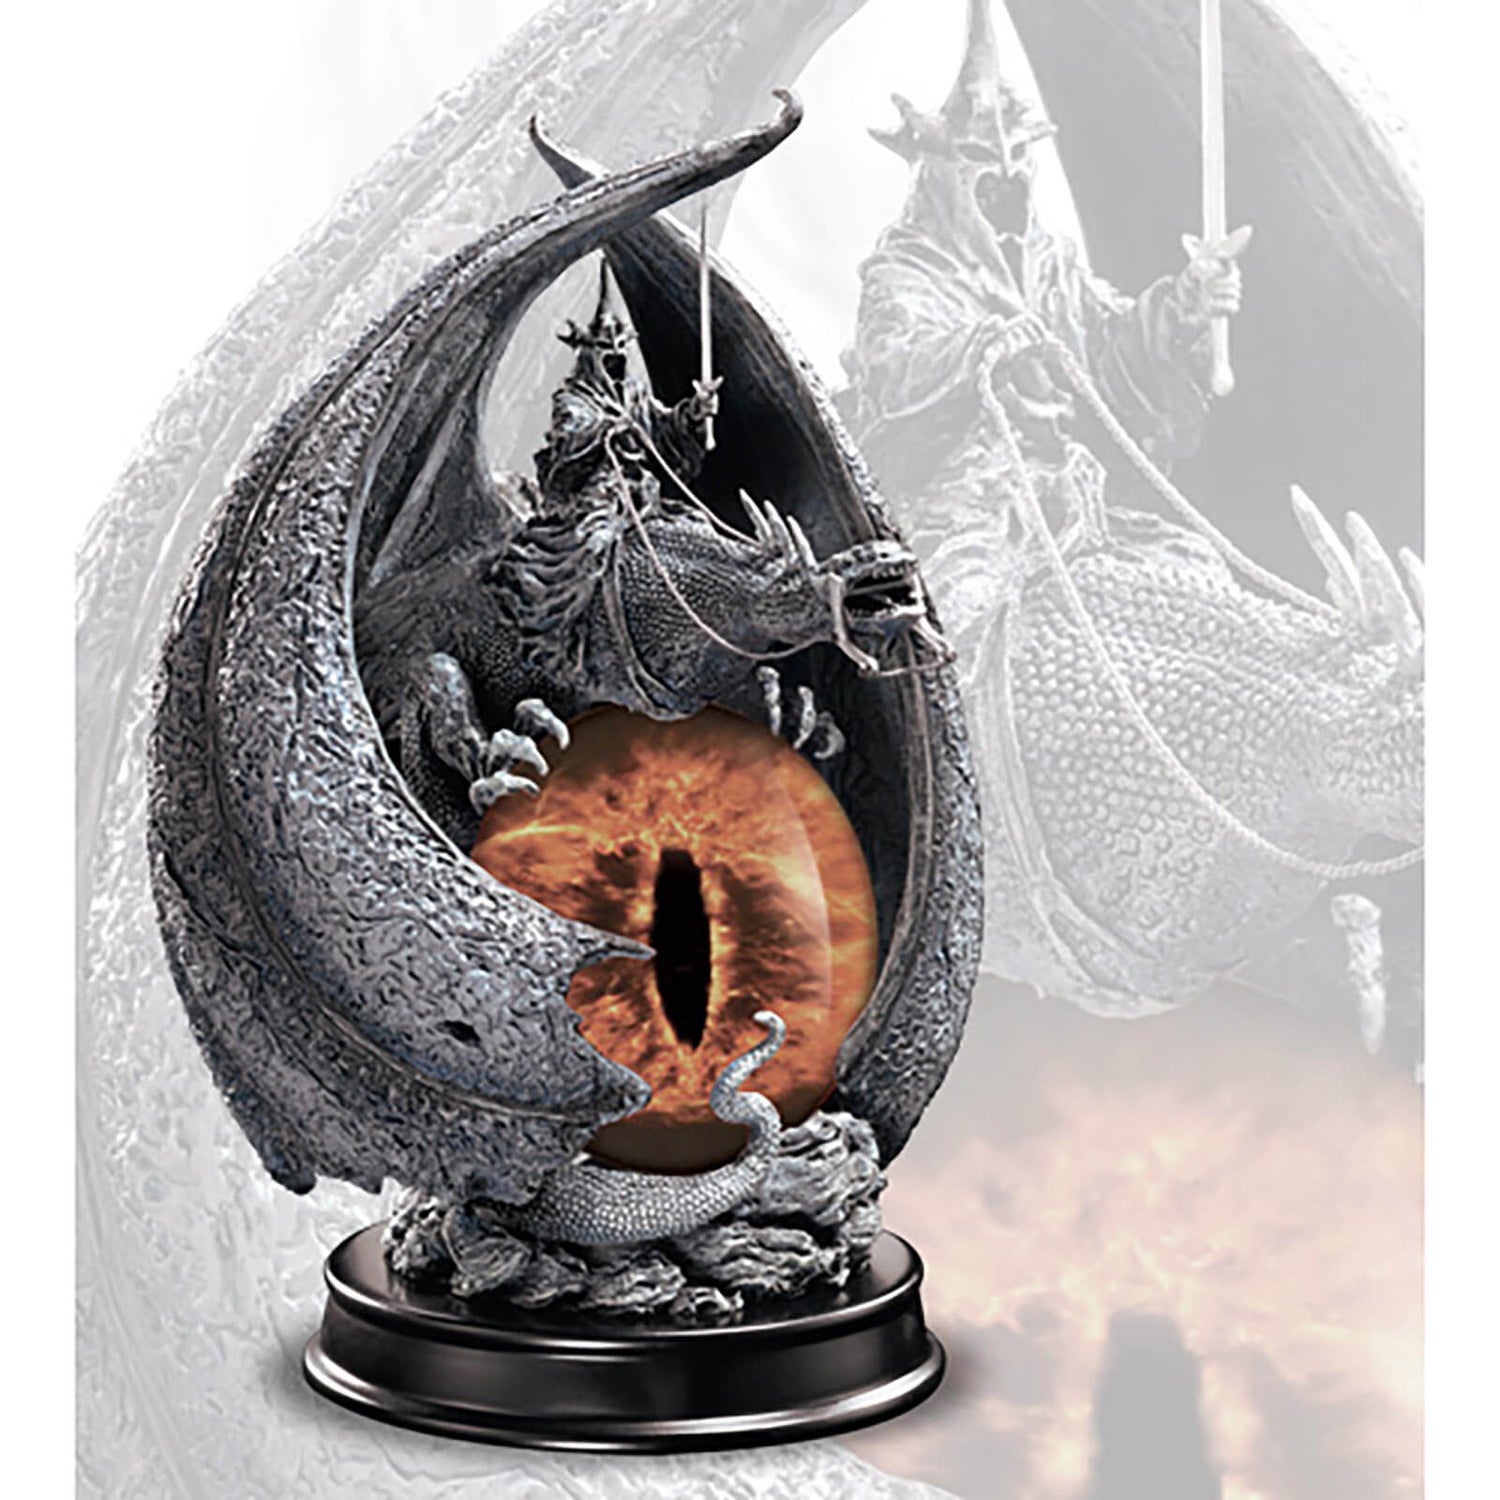 The Lord of the Rings — The Noble Collection UK